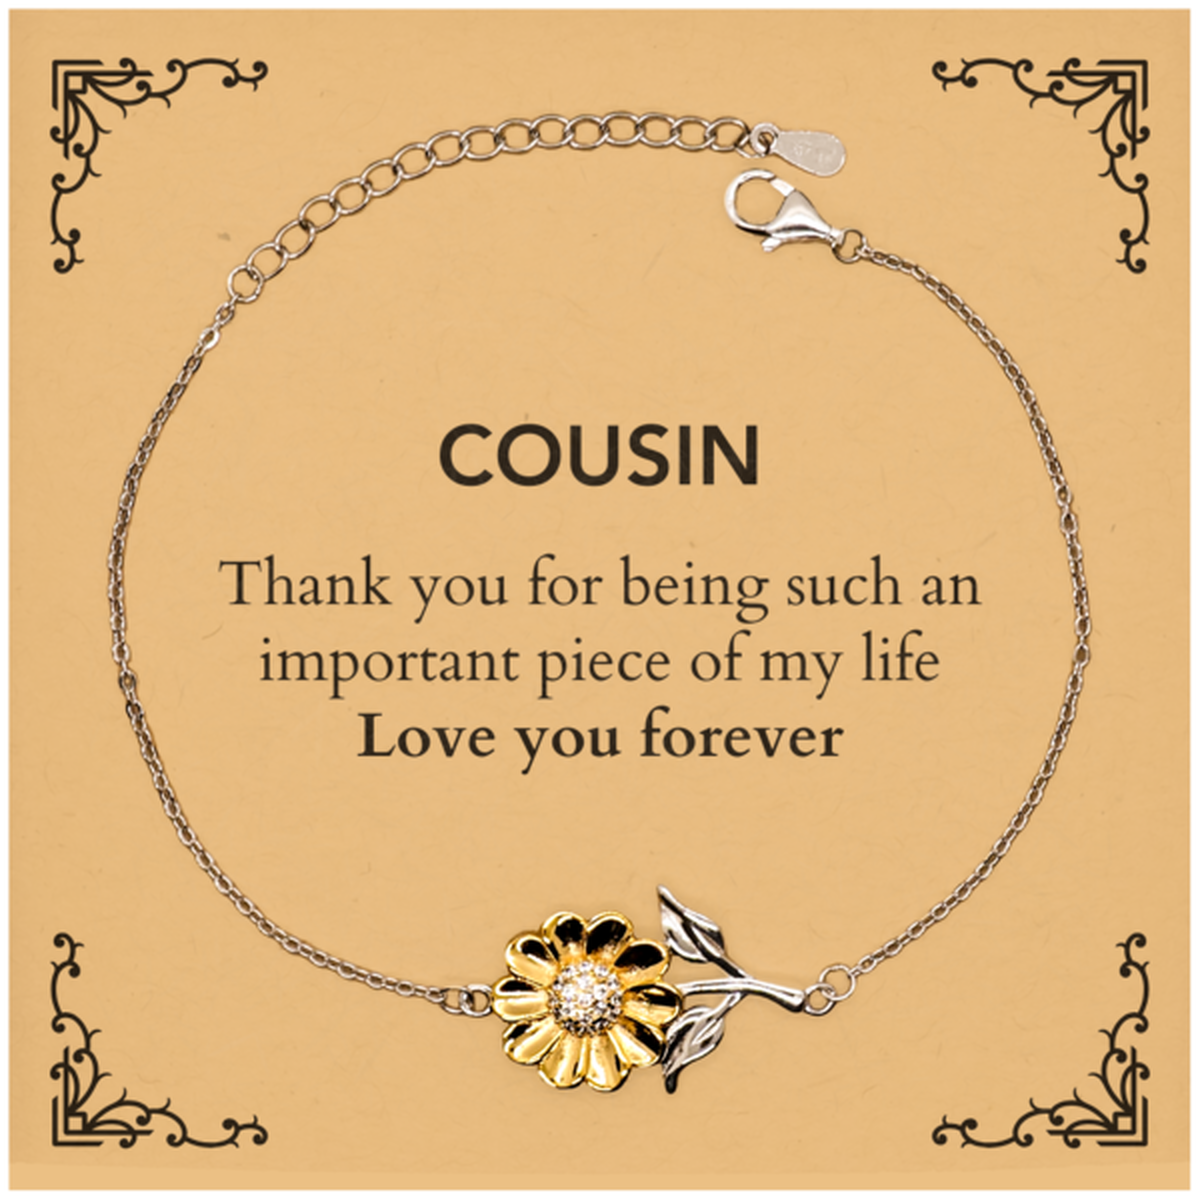 Appropriate Cousin Sunflower Bracelet Epic Birthday Gifts for Cousin Thank you for being such an important piece of my life Cousin Christmas Mothers Fathers Day